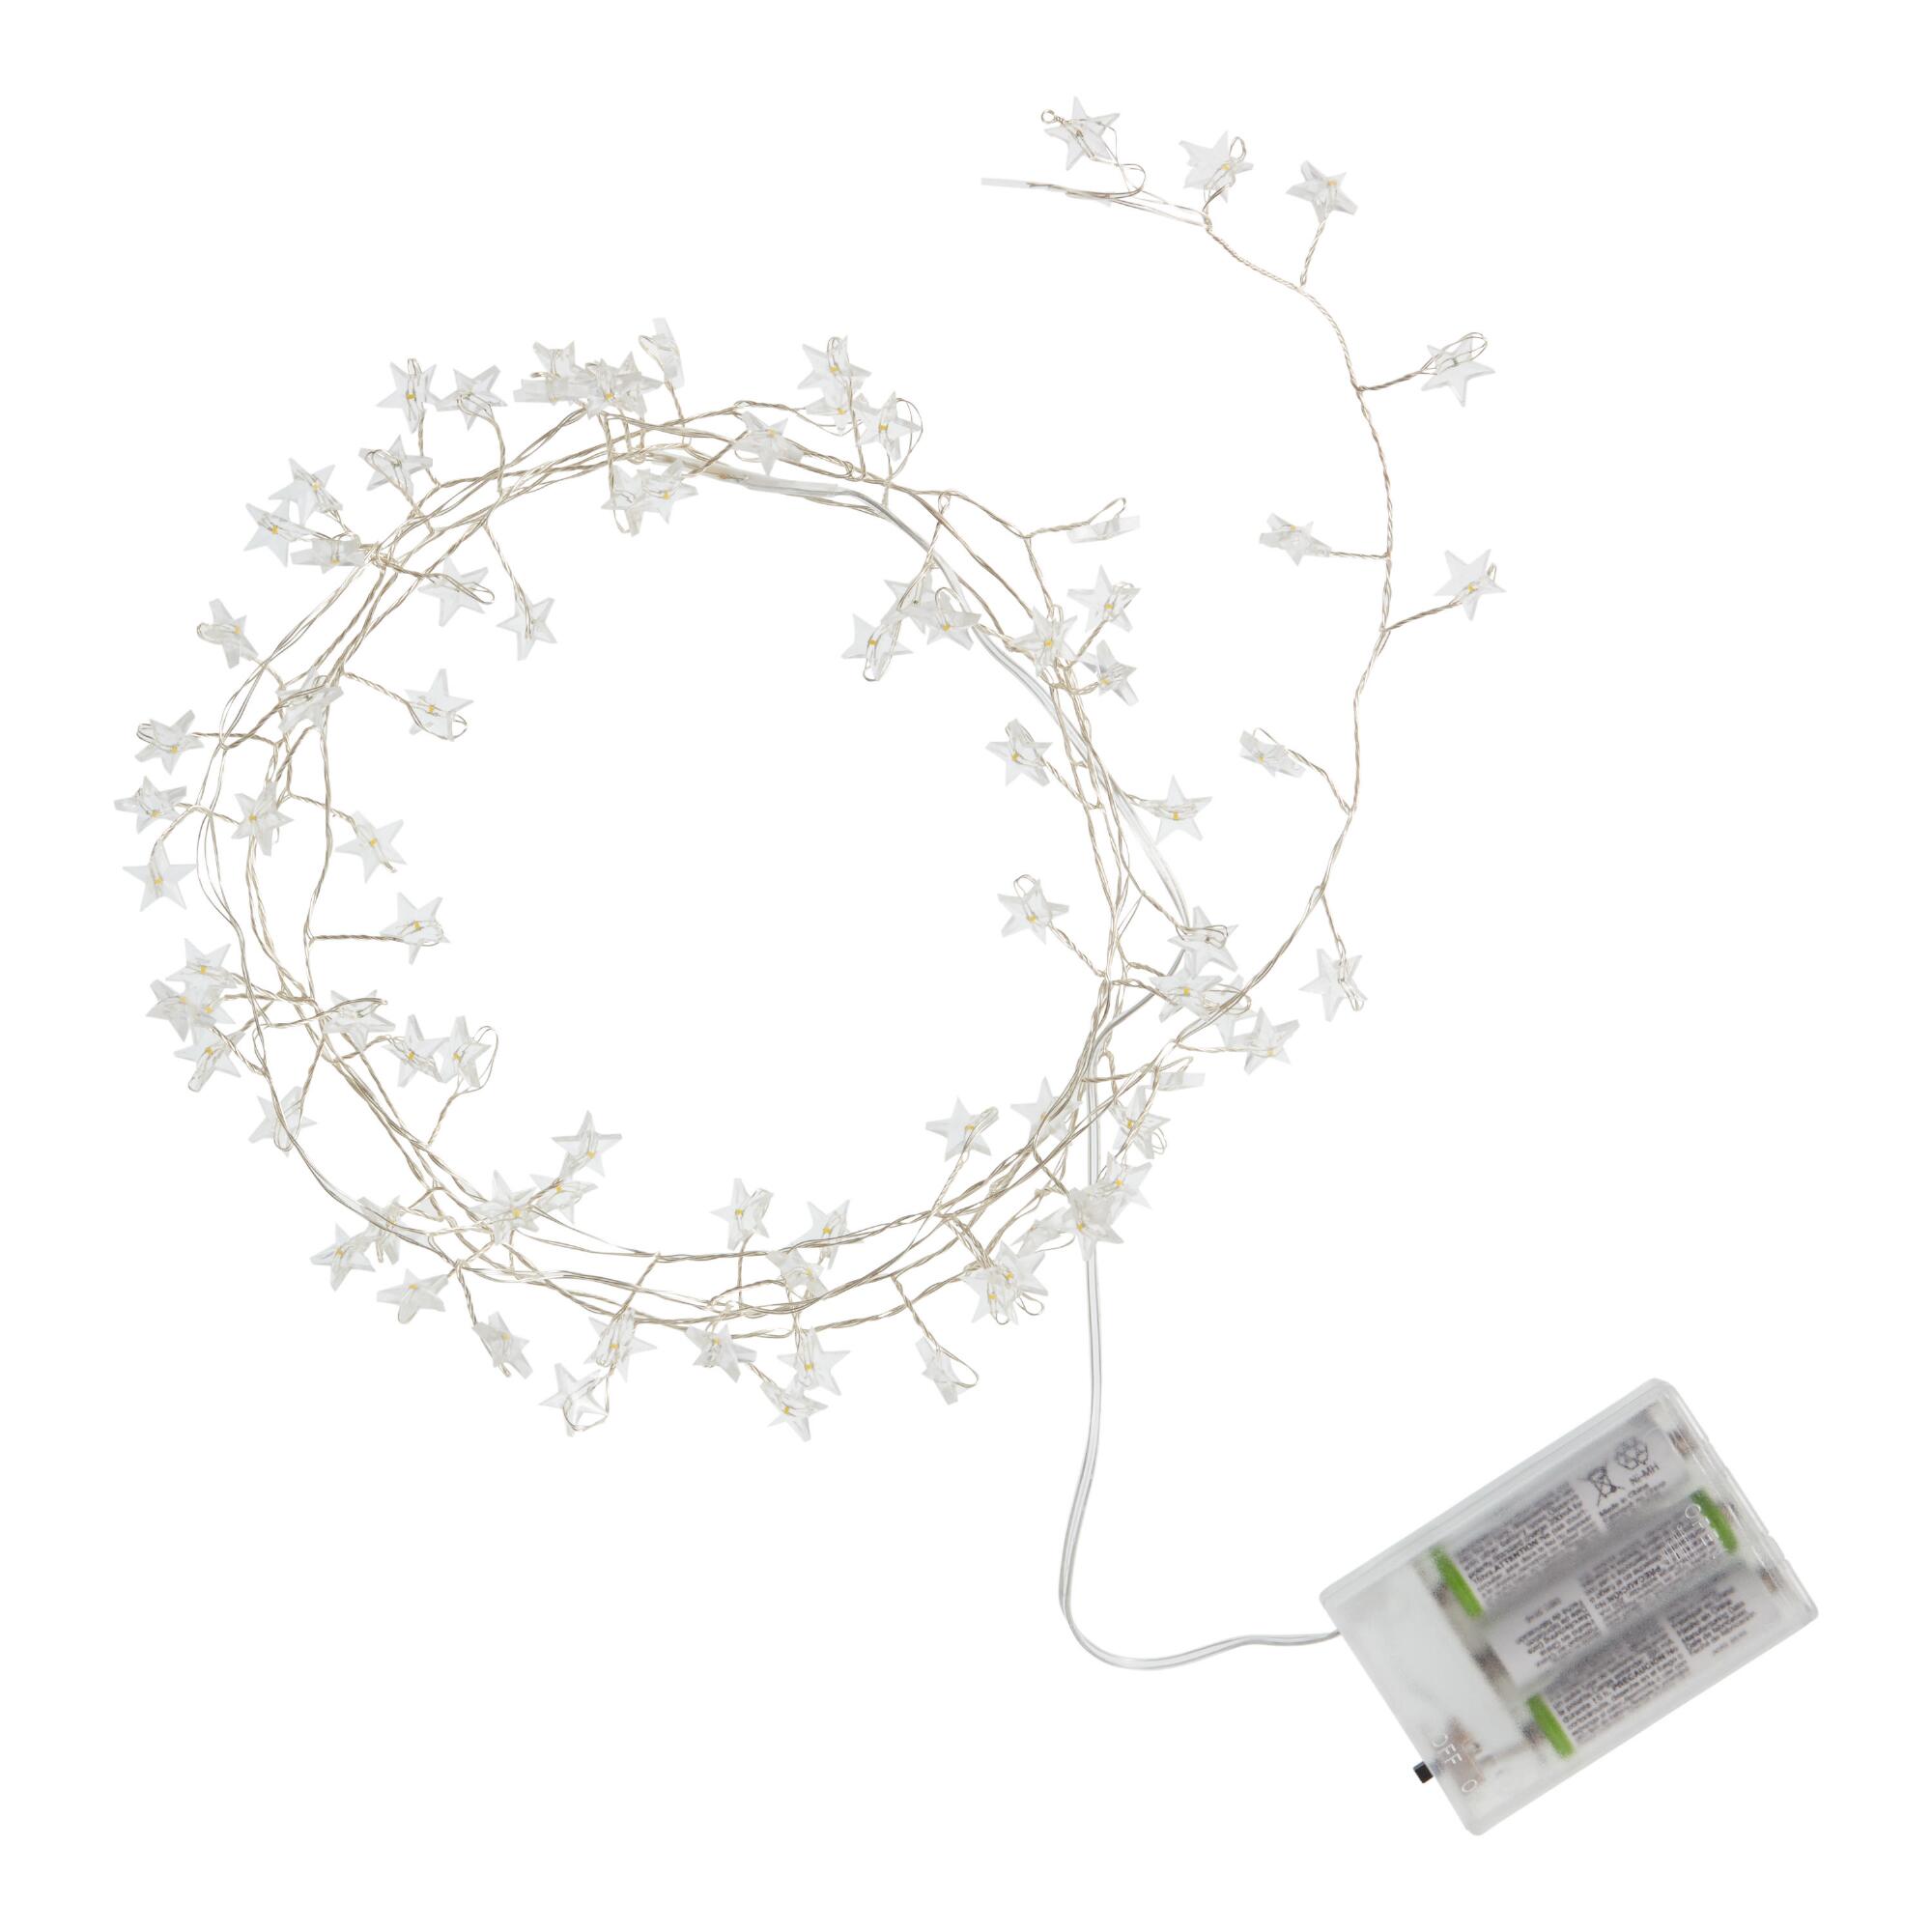 Clear Star Micro LED 96 Bulb Battery Operated String Lights: White - Plastic by World Market